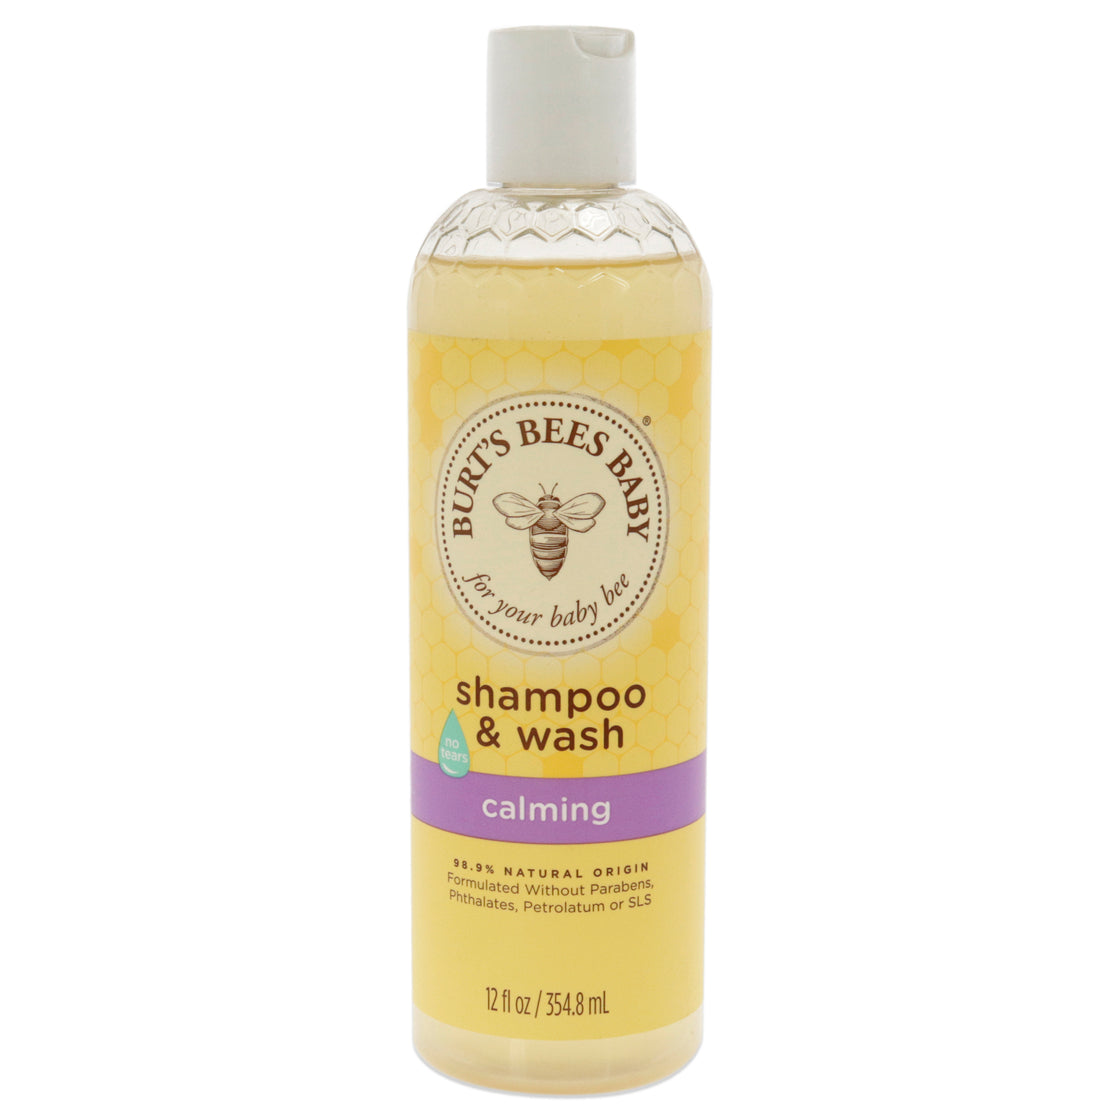 Baby Shampoo and Wash Calming by Burts Bees for Kids - 12 oz Shampoo and Body Wash